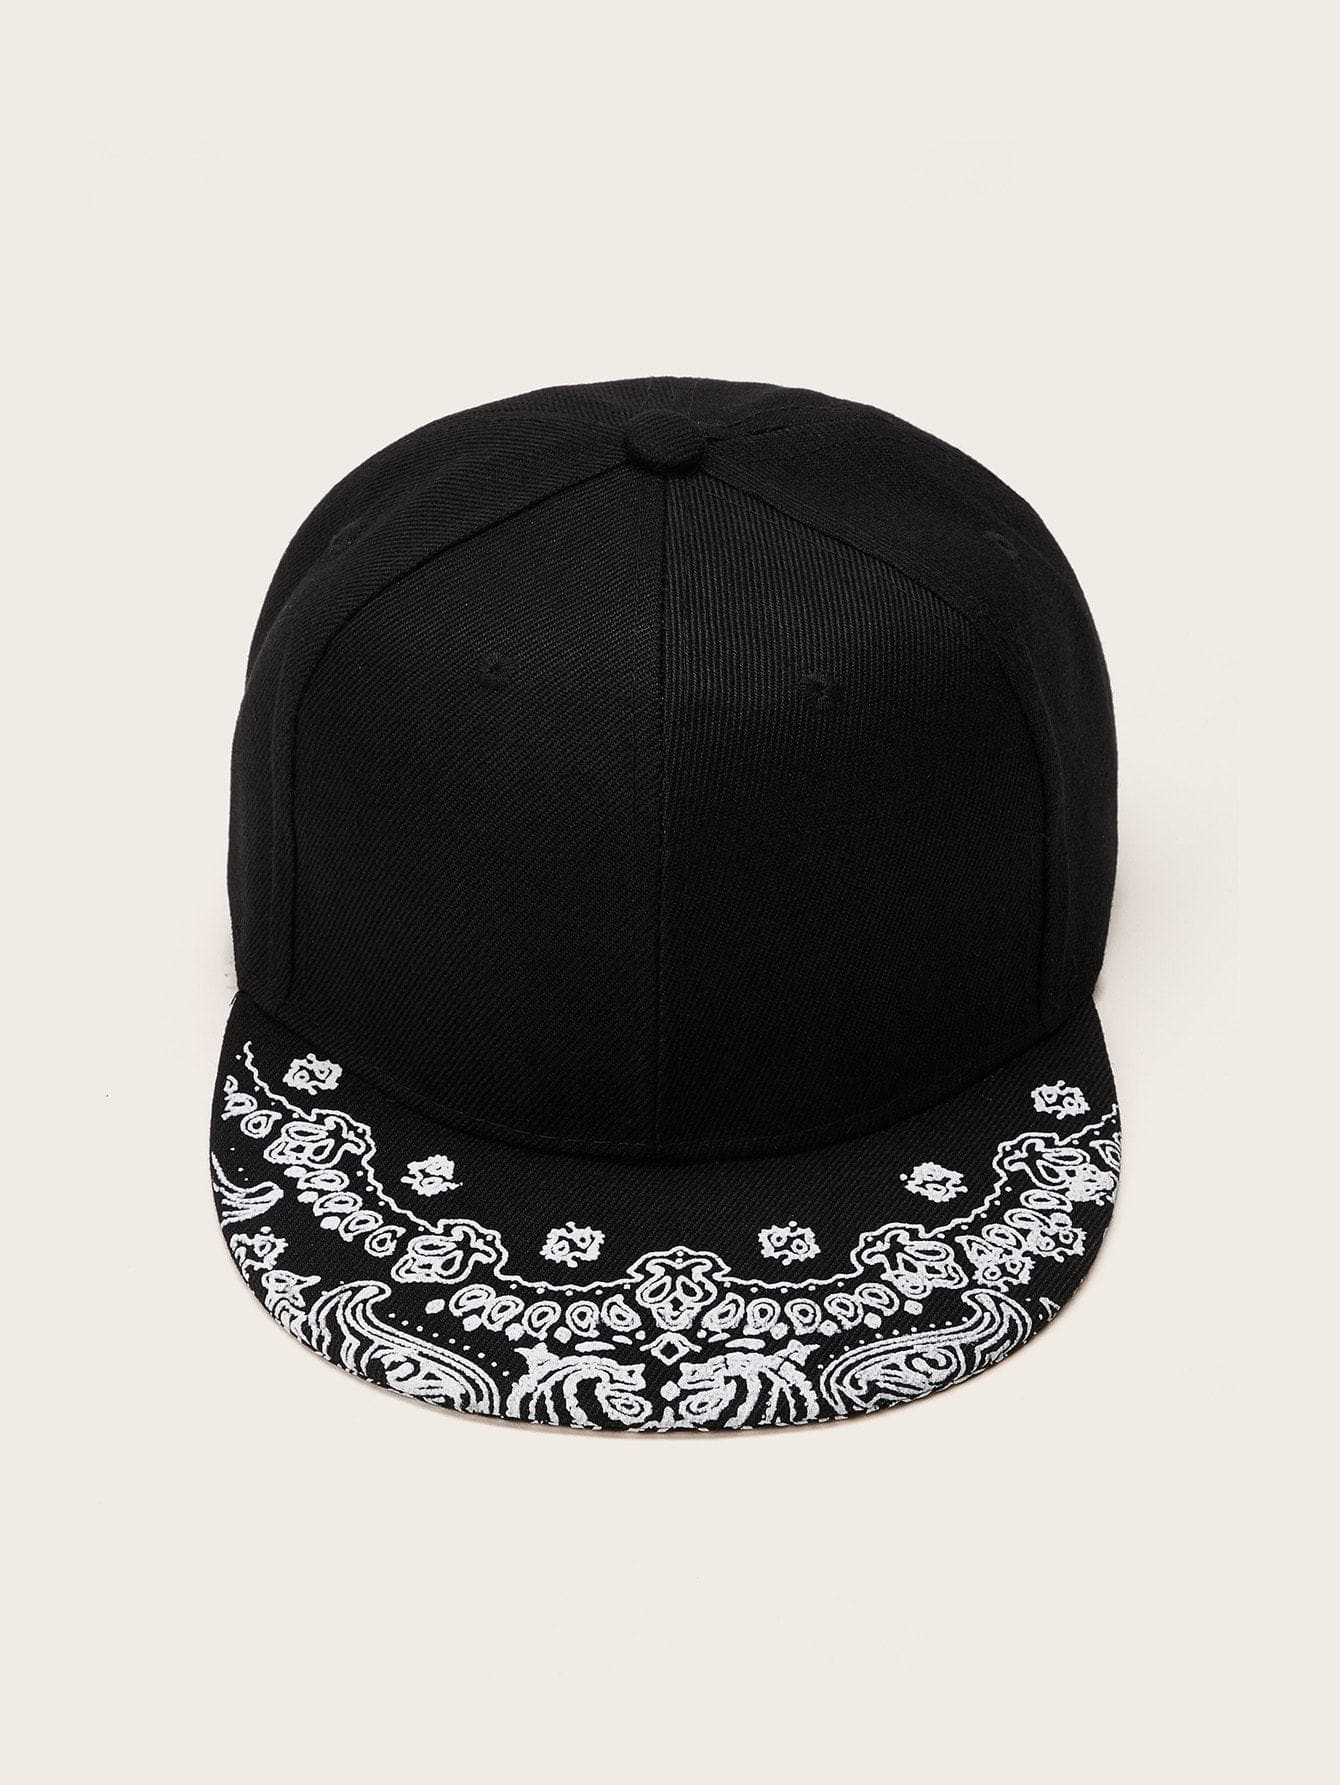 Black and White Cashew Pattern Snap Cap